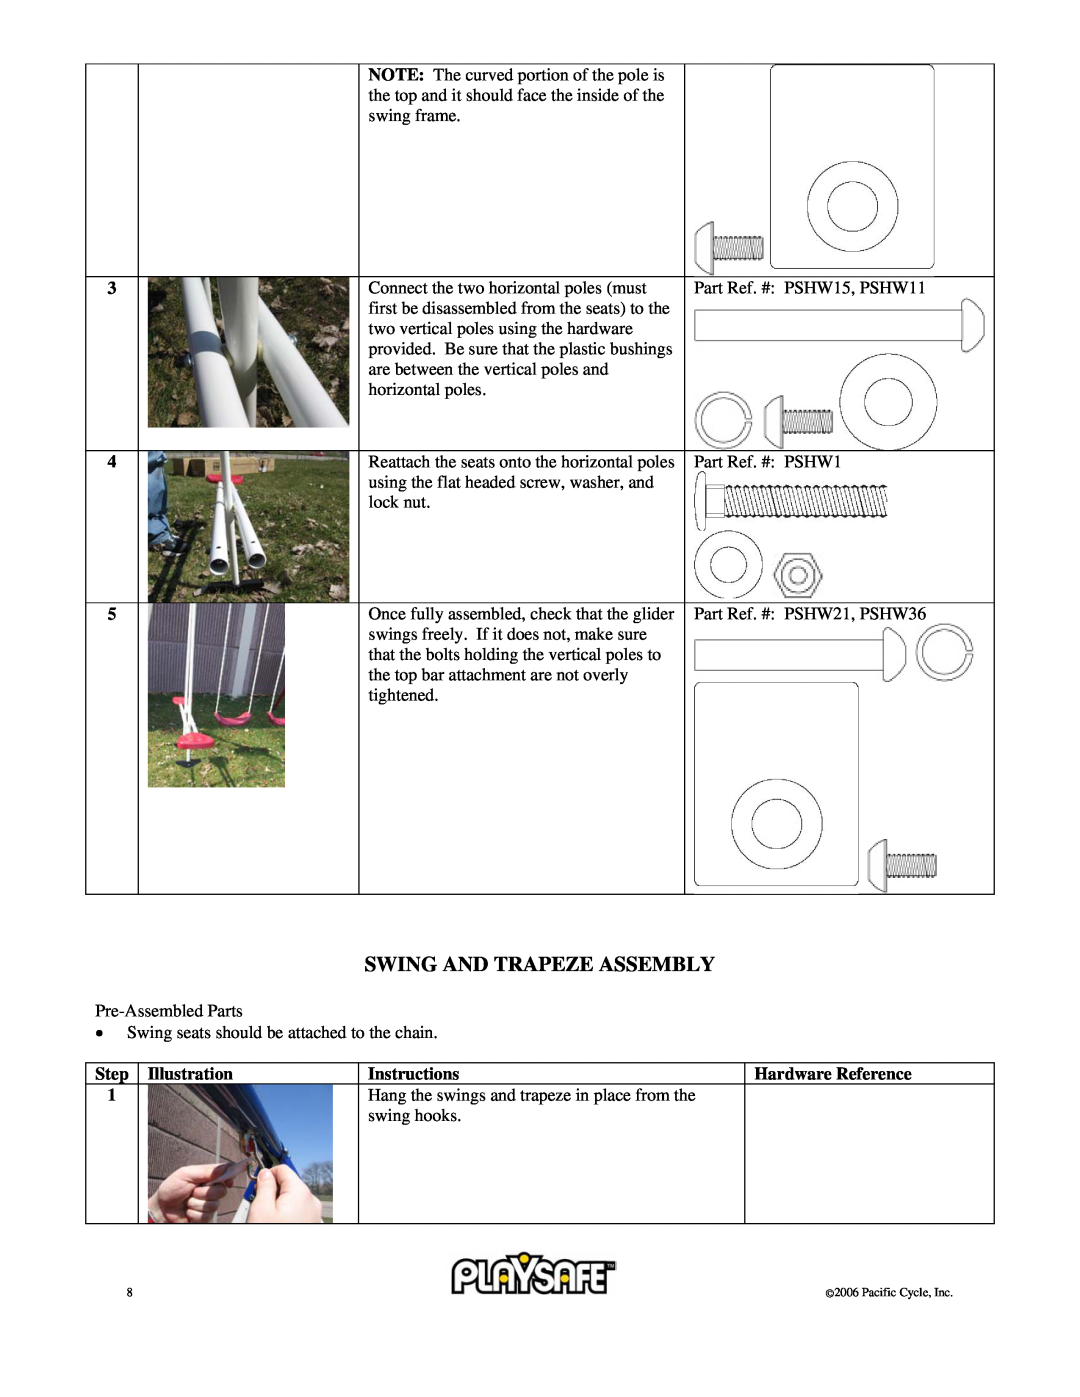 Pacific Cycle 22-PS245 owner manual Swing And Trapeze Assembly, 3 4 5, Step, Illustration, Instructions, Hardware Reference 